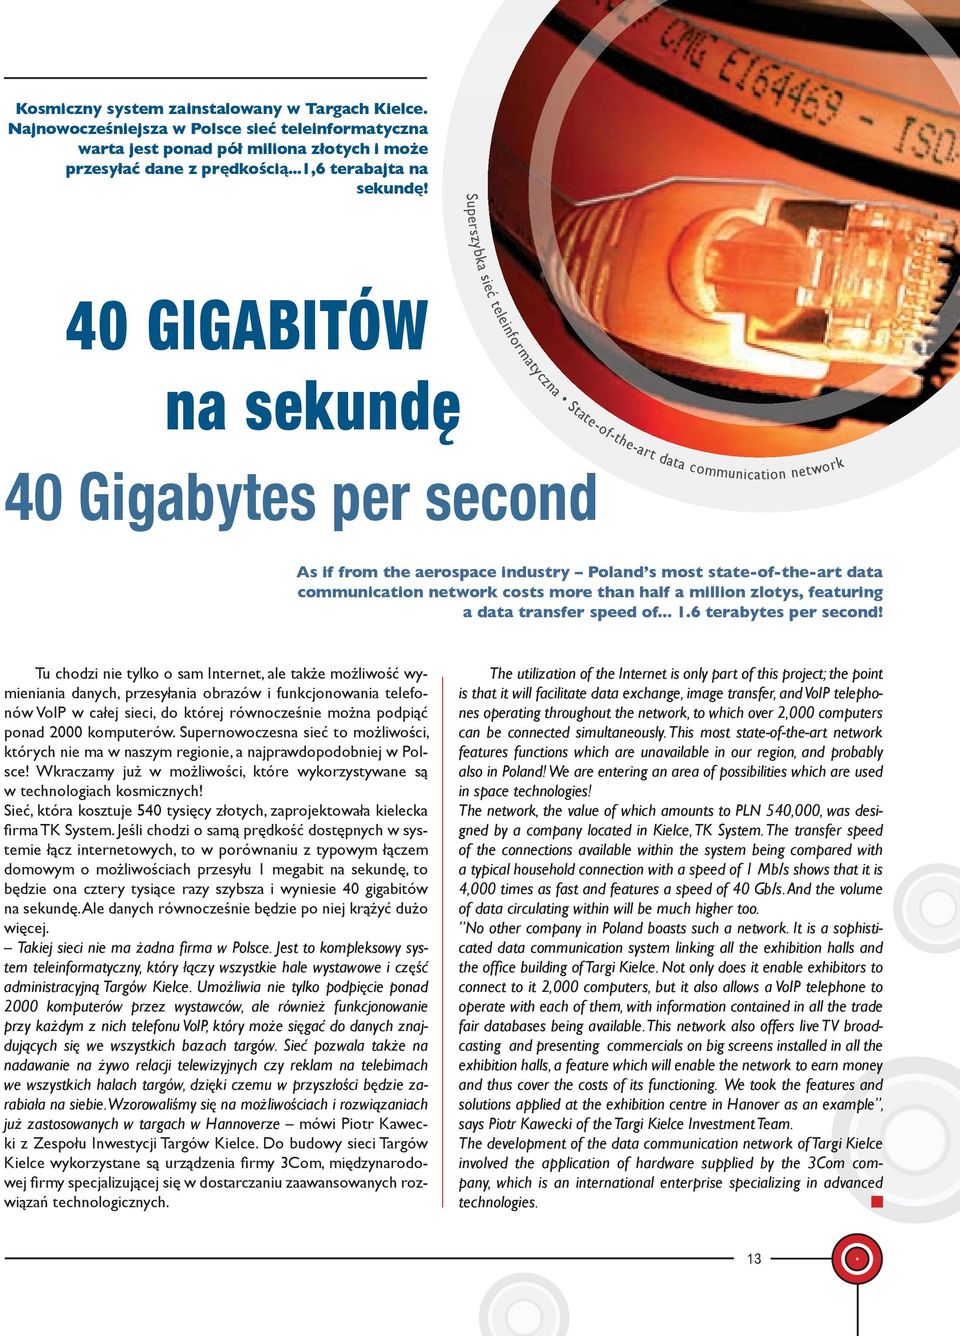 industry Poland s most state-of-the-art data communication network costs more than half a million zlotys, featuring a data transfer speed of... 1.6 terabytes per second!